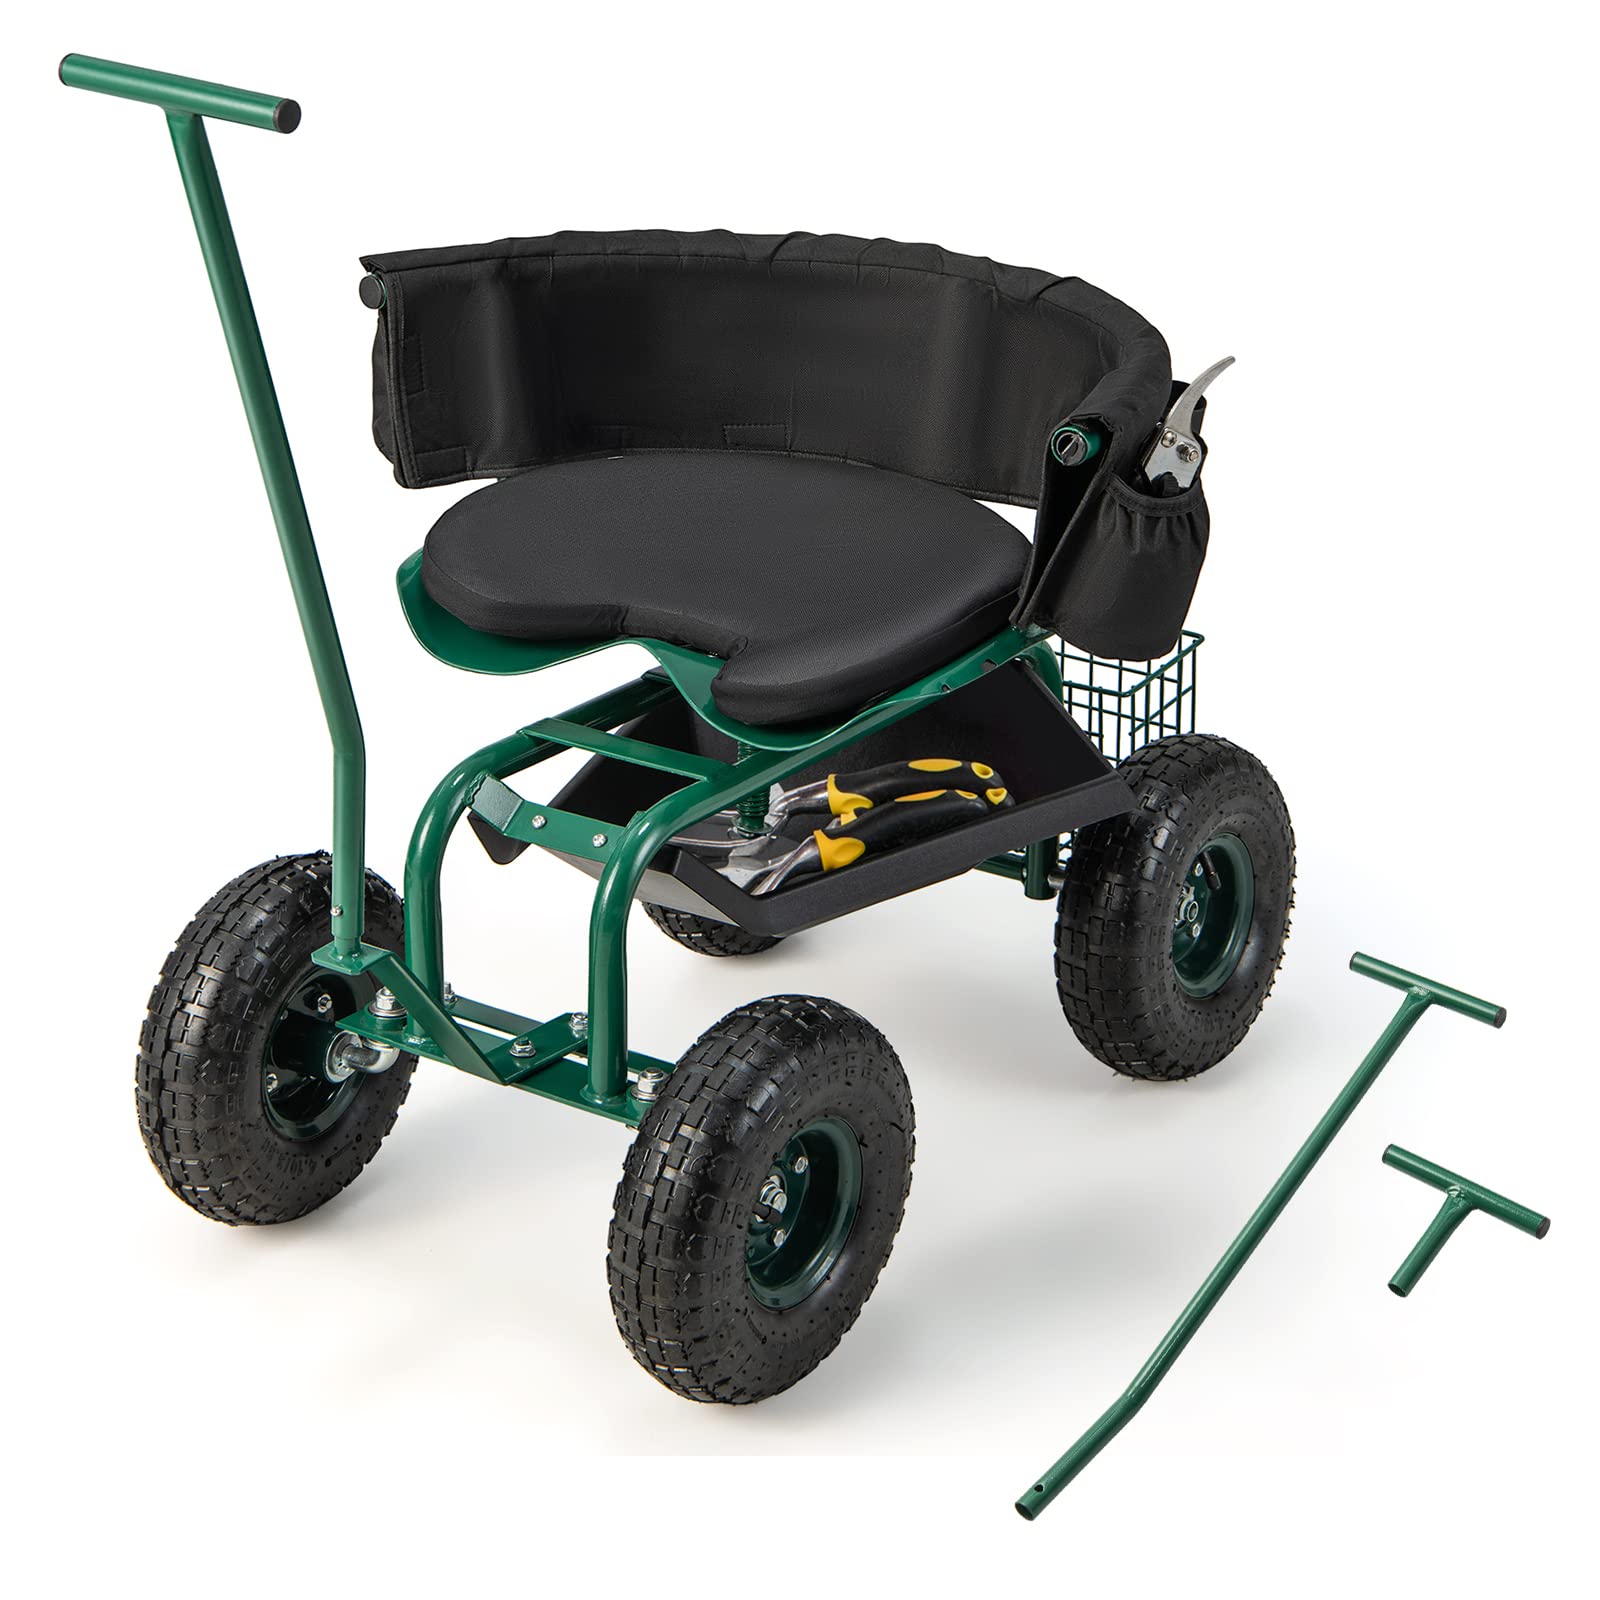 Giantex Garden Cart, Rolling Workseat with 4 Wheels, Tool Tray, Removable Cushion, Storage Basket